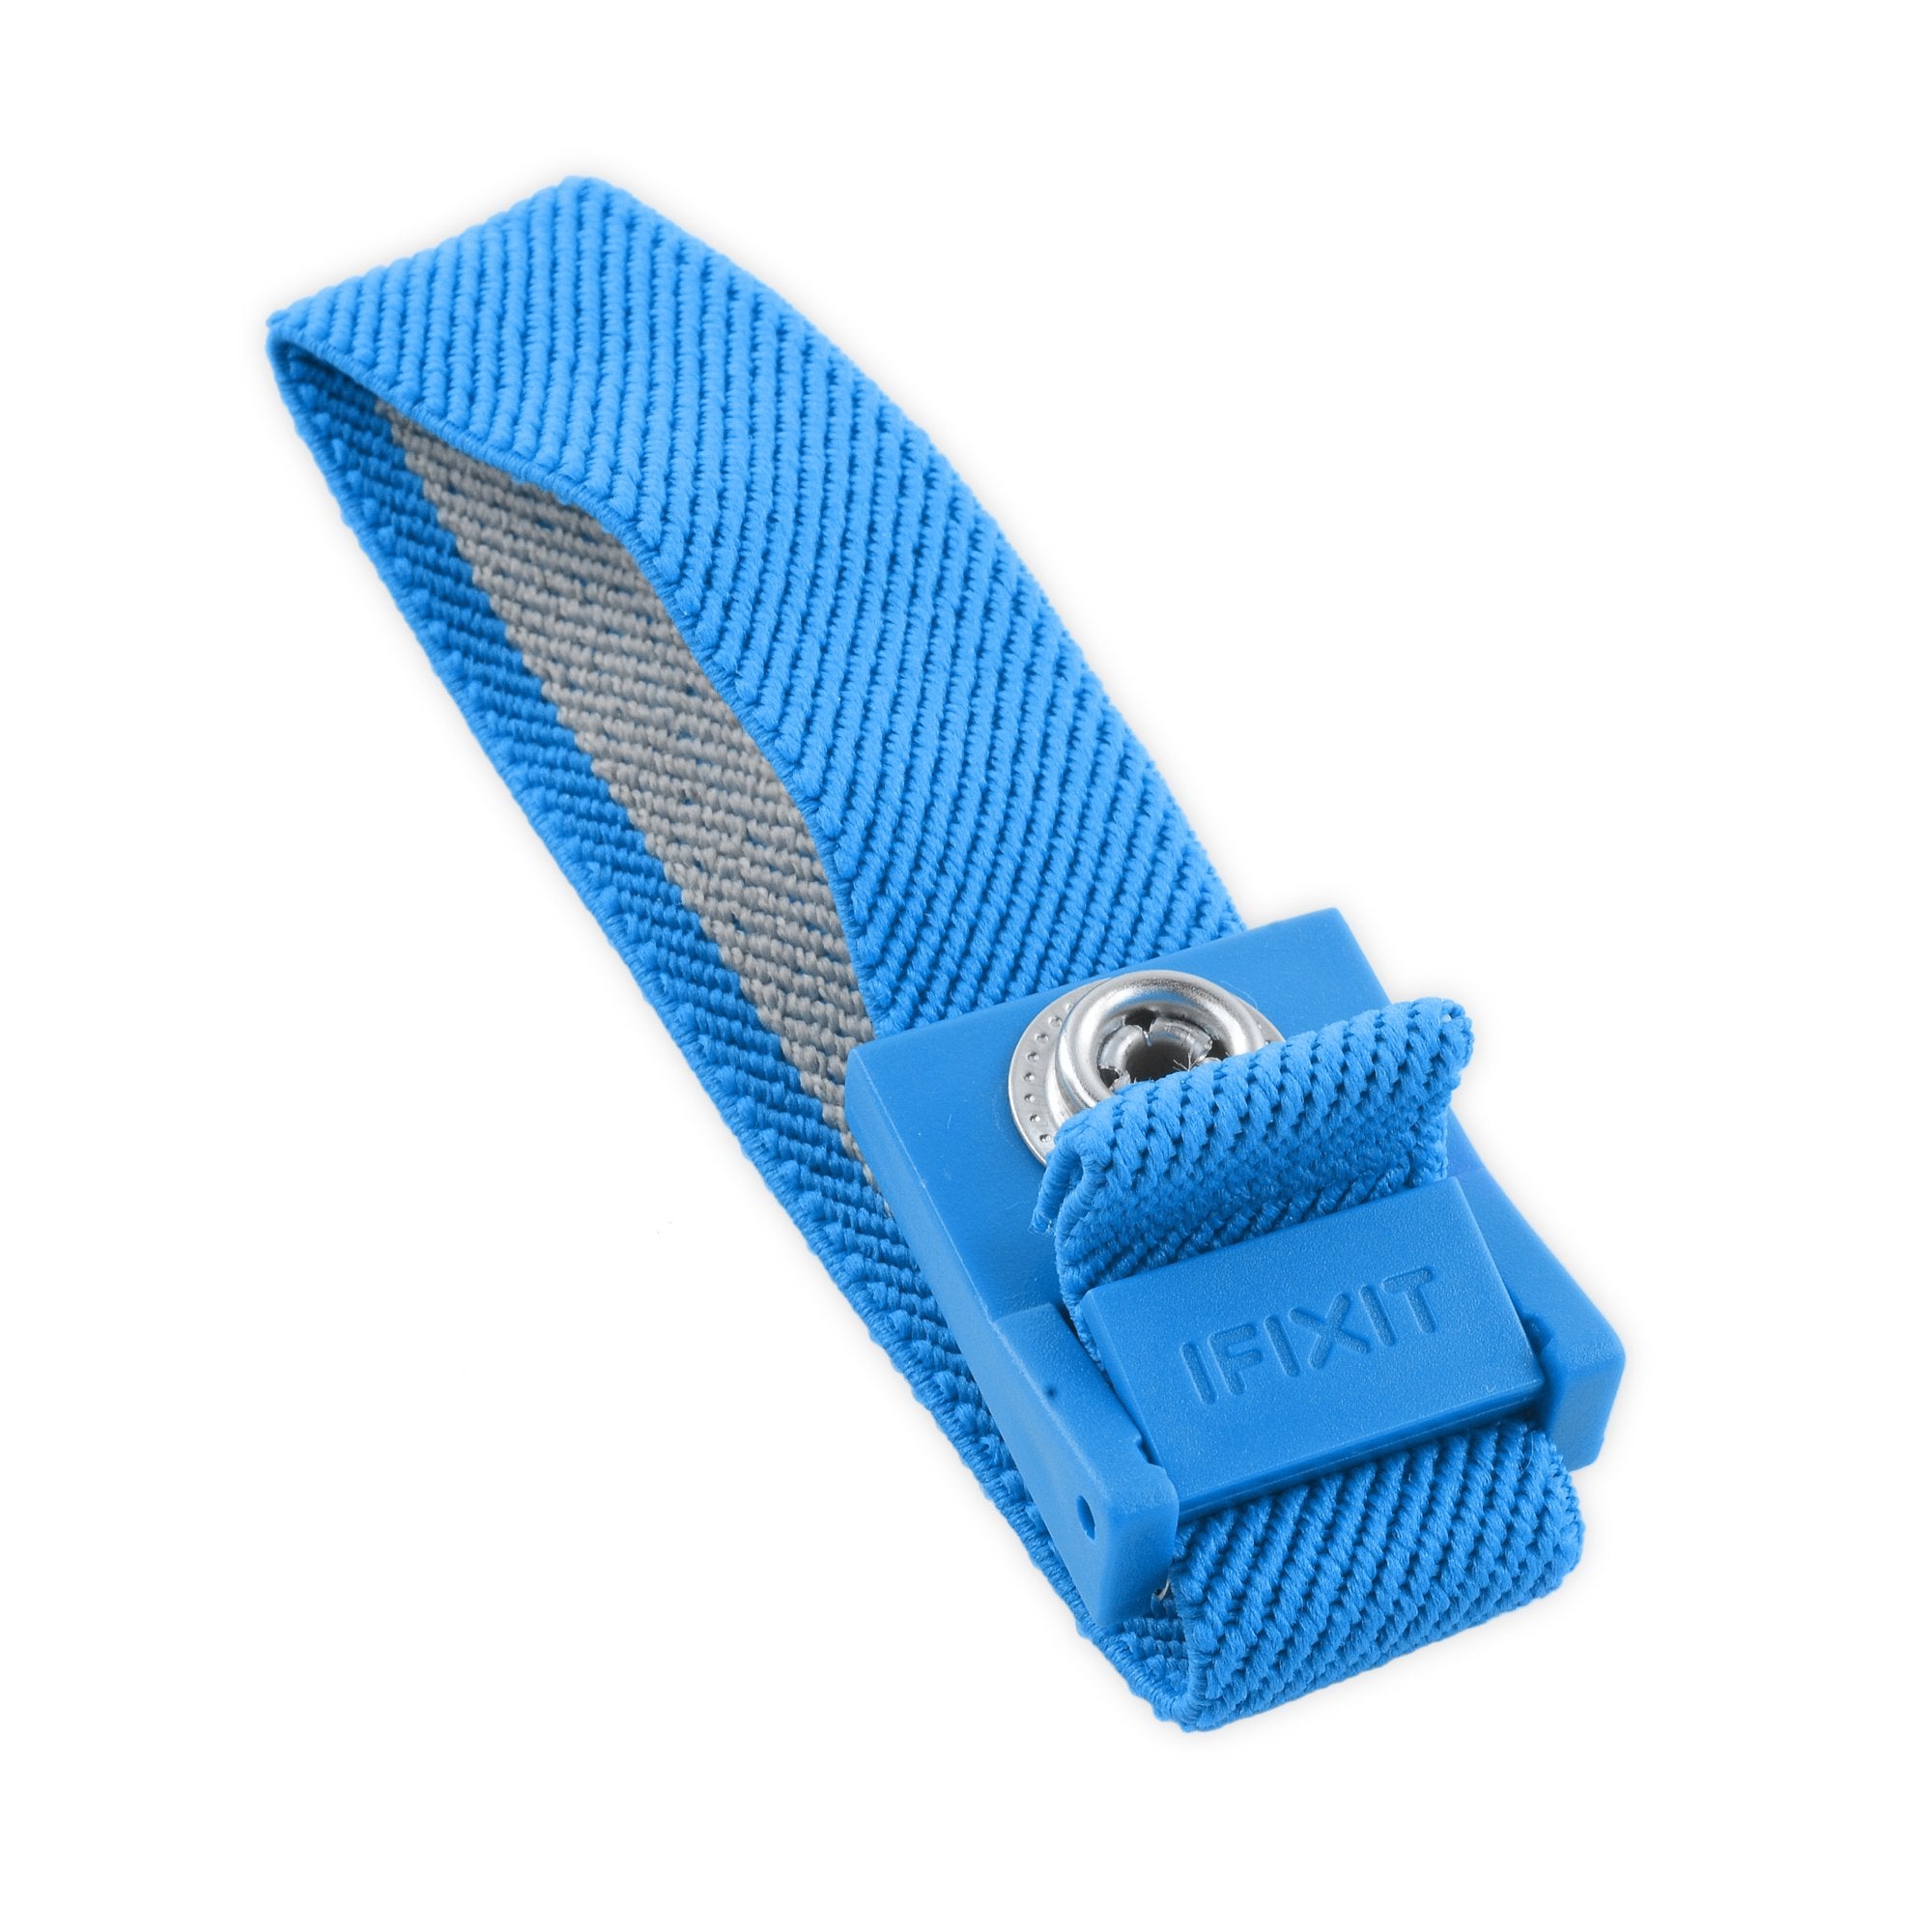 How Does An Anti Static Wristband Work?